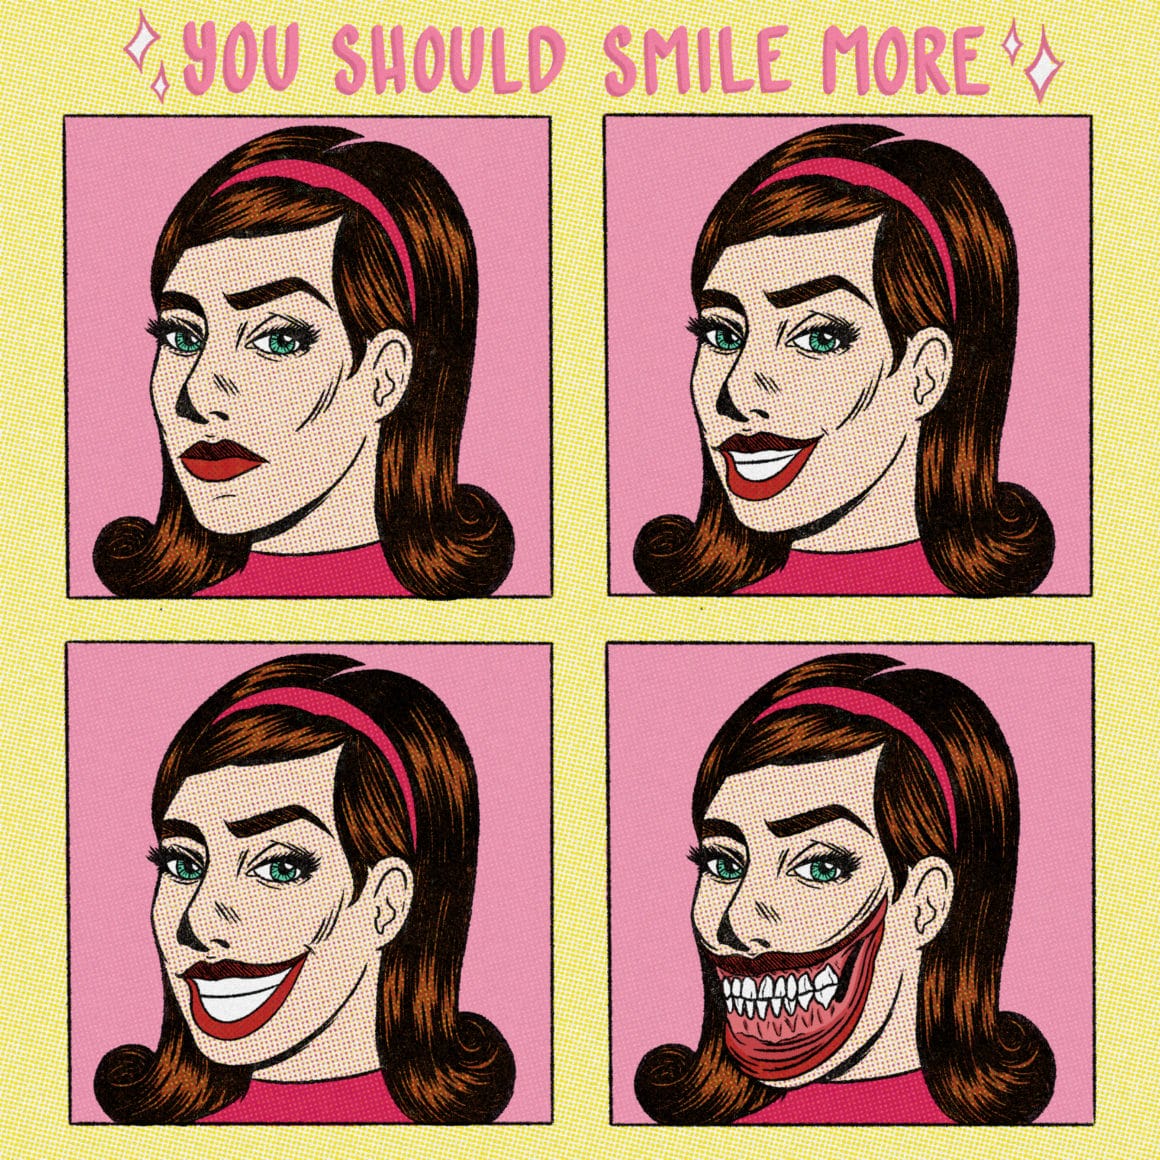 You should smile more